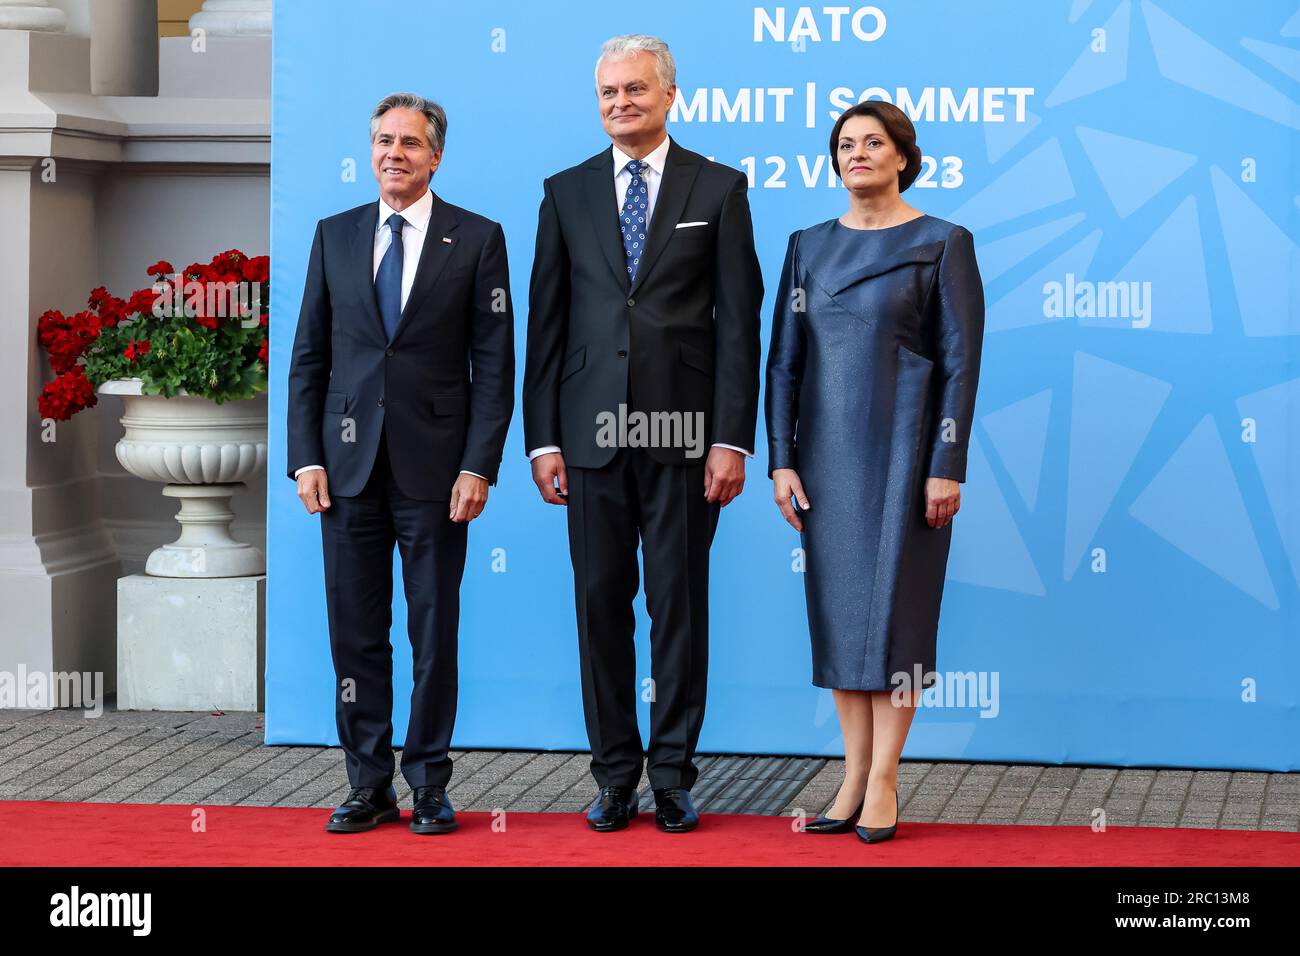 Vilnius, Lithuania. 11th July, 2023. President of Lithuania, Gitanas Naus?da and his wife Diana Naus?dien? wellcome United States Secretary of State, Antony Blinken as he arrives for a social dinner during the high level NATO summit in Vilnius, Lithuania on July 11, 2023. The President of Lithuania hosts the dinner for world leaders in the Presidential Palace. The summit agenda covers Ukraine's bid to join the organisation, the accession process of Sweden, boosting arms stockpiles and reviewing defence plans. (Photo by Dominika Zarzycka/Sipa USA) Credit: Sipa USA/Alamy Live News Stock Photo